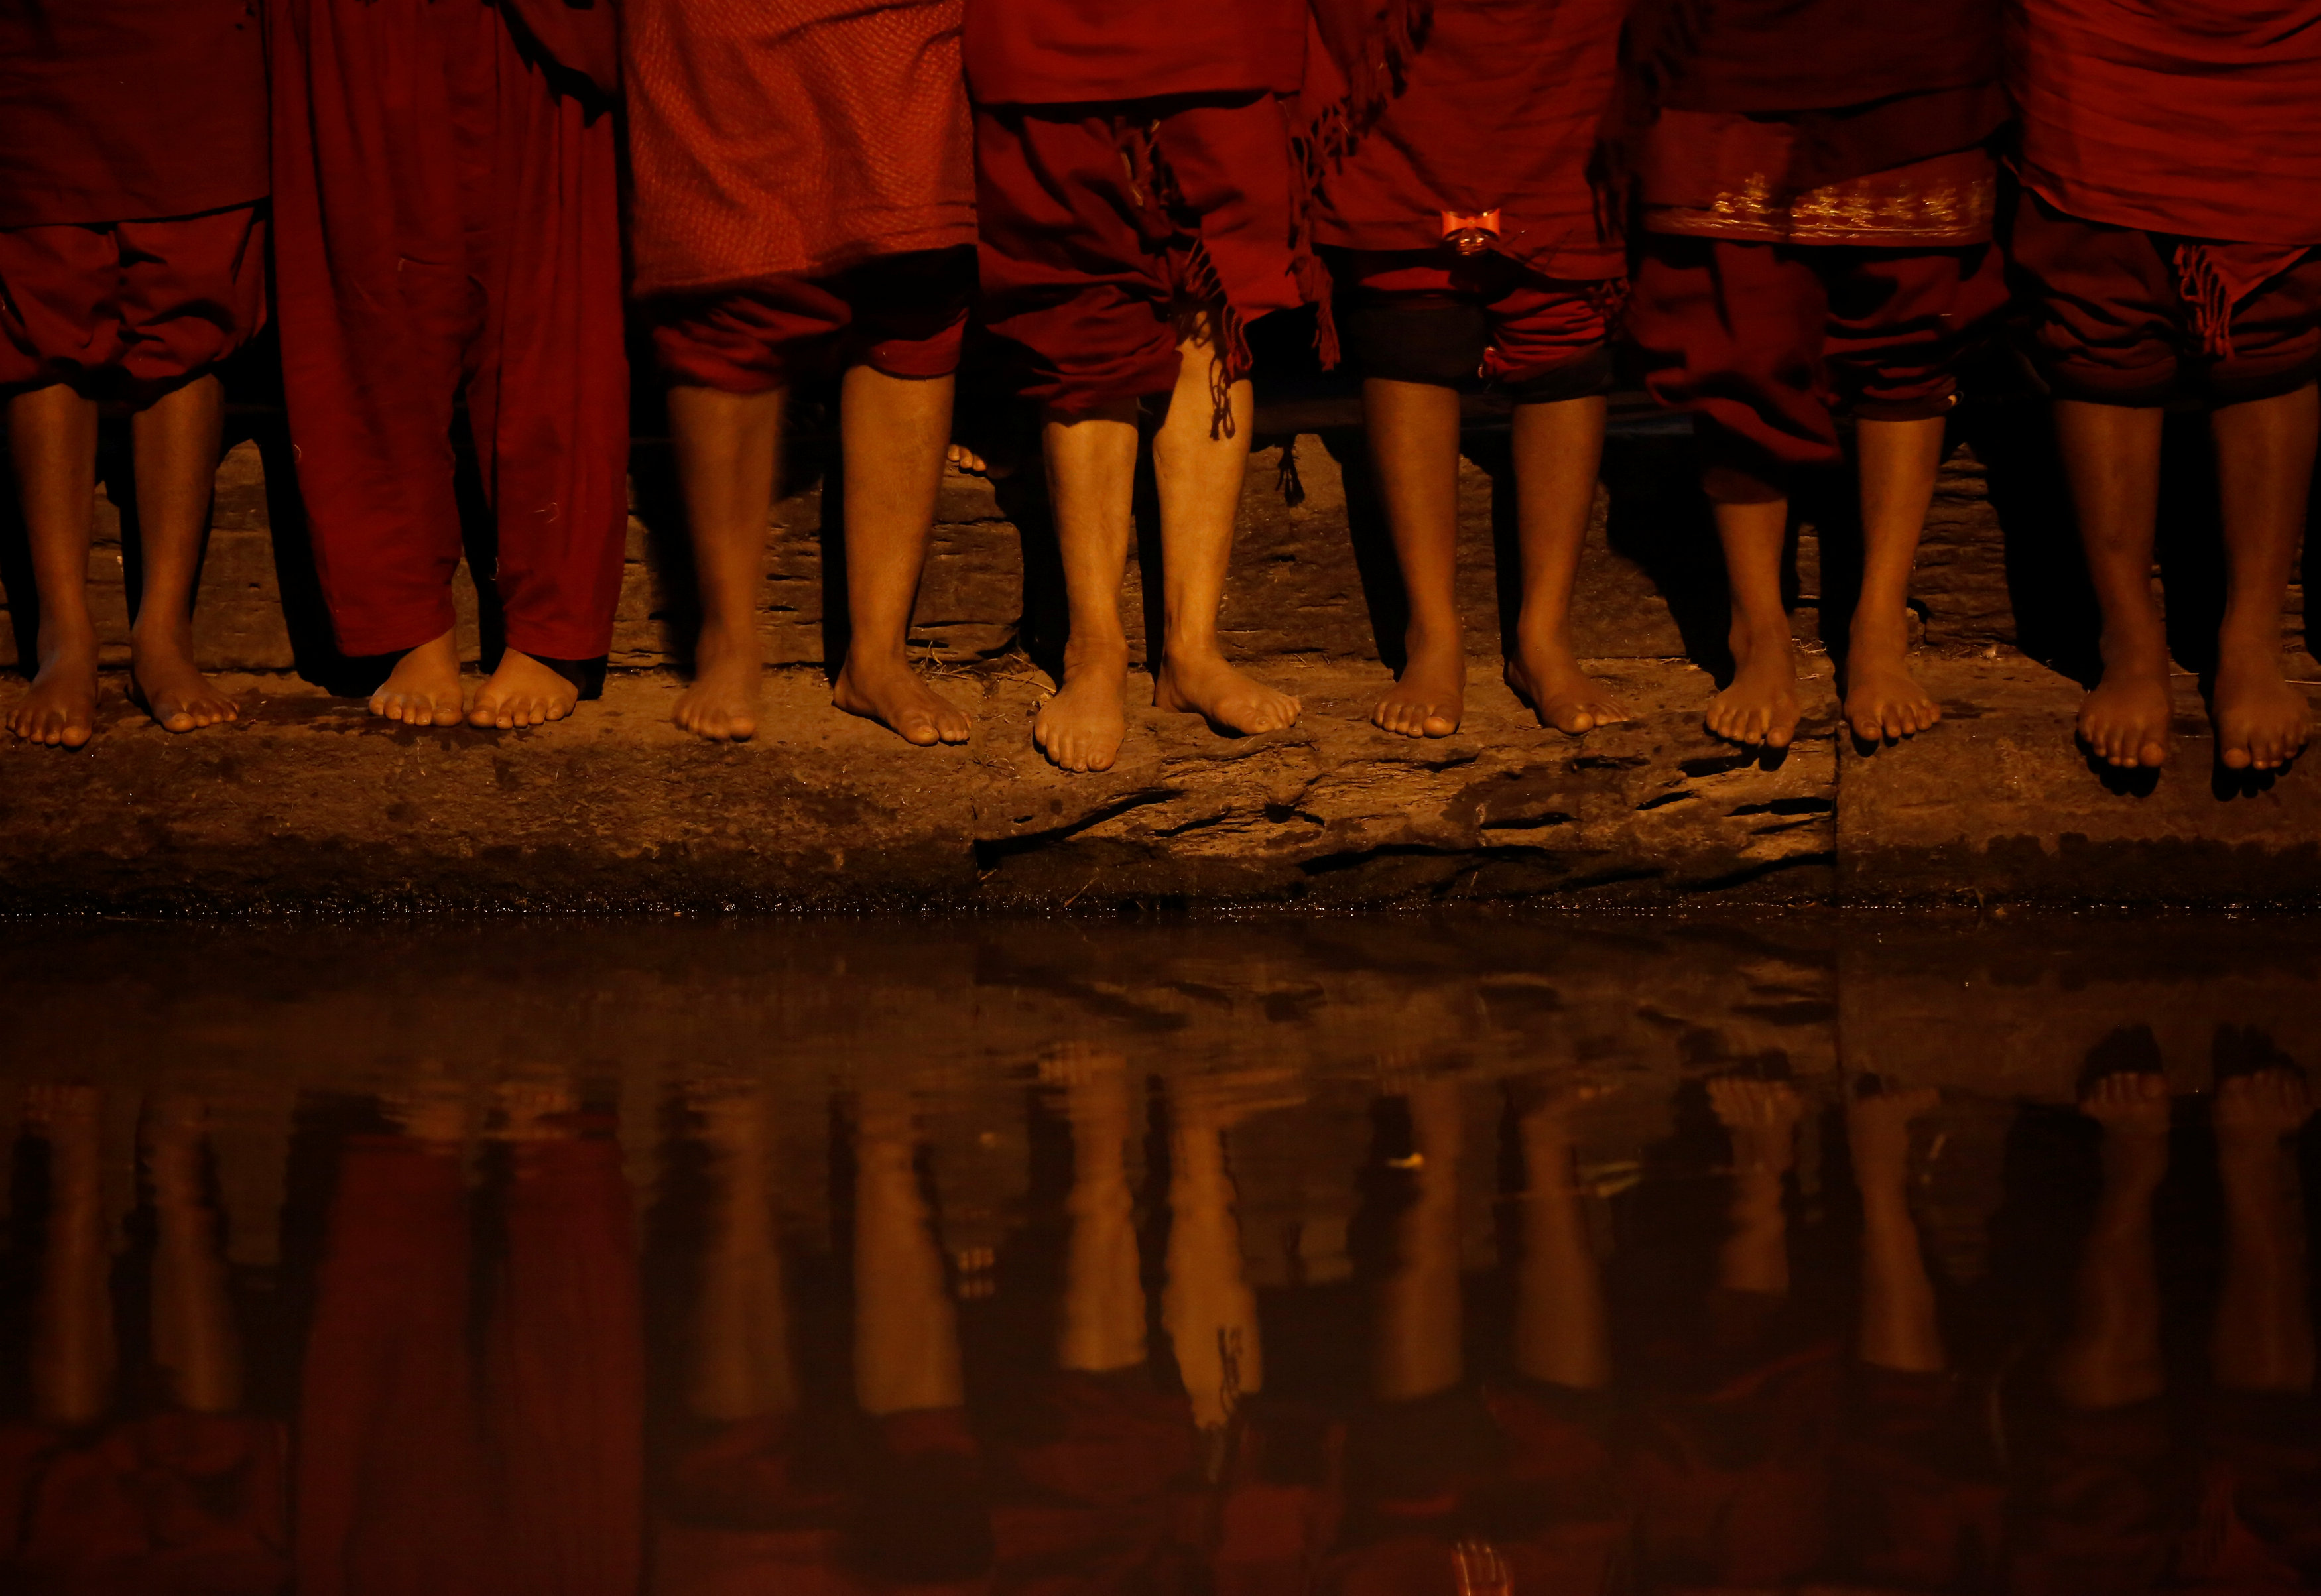 The feet of devotees are pictured as they stand on the banks of the Bagmati River during the Swasthani Brata Katha festival in Kathmandu, Nepal, January 27, 2017. REUTERS/Navesh Chitrakar